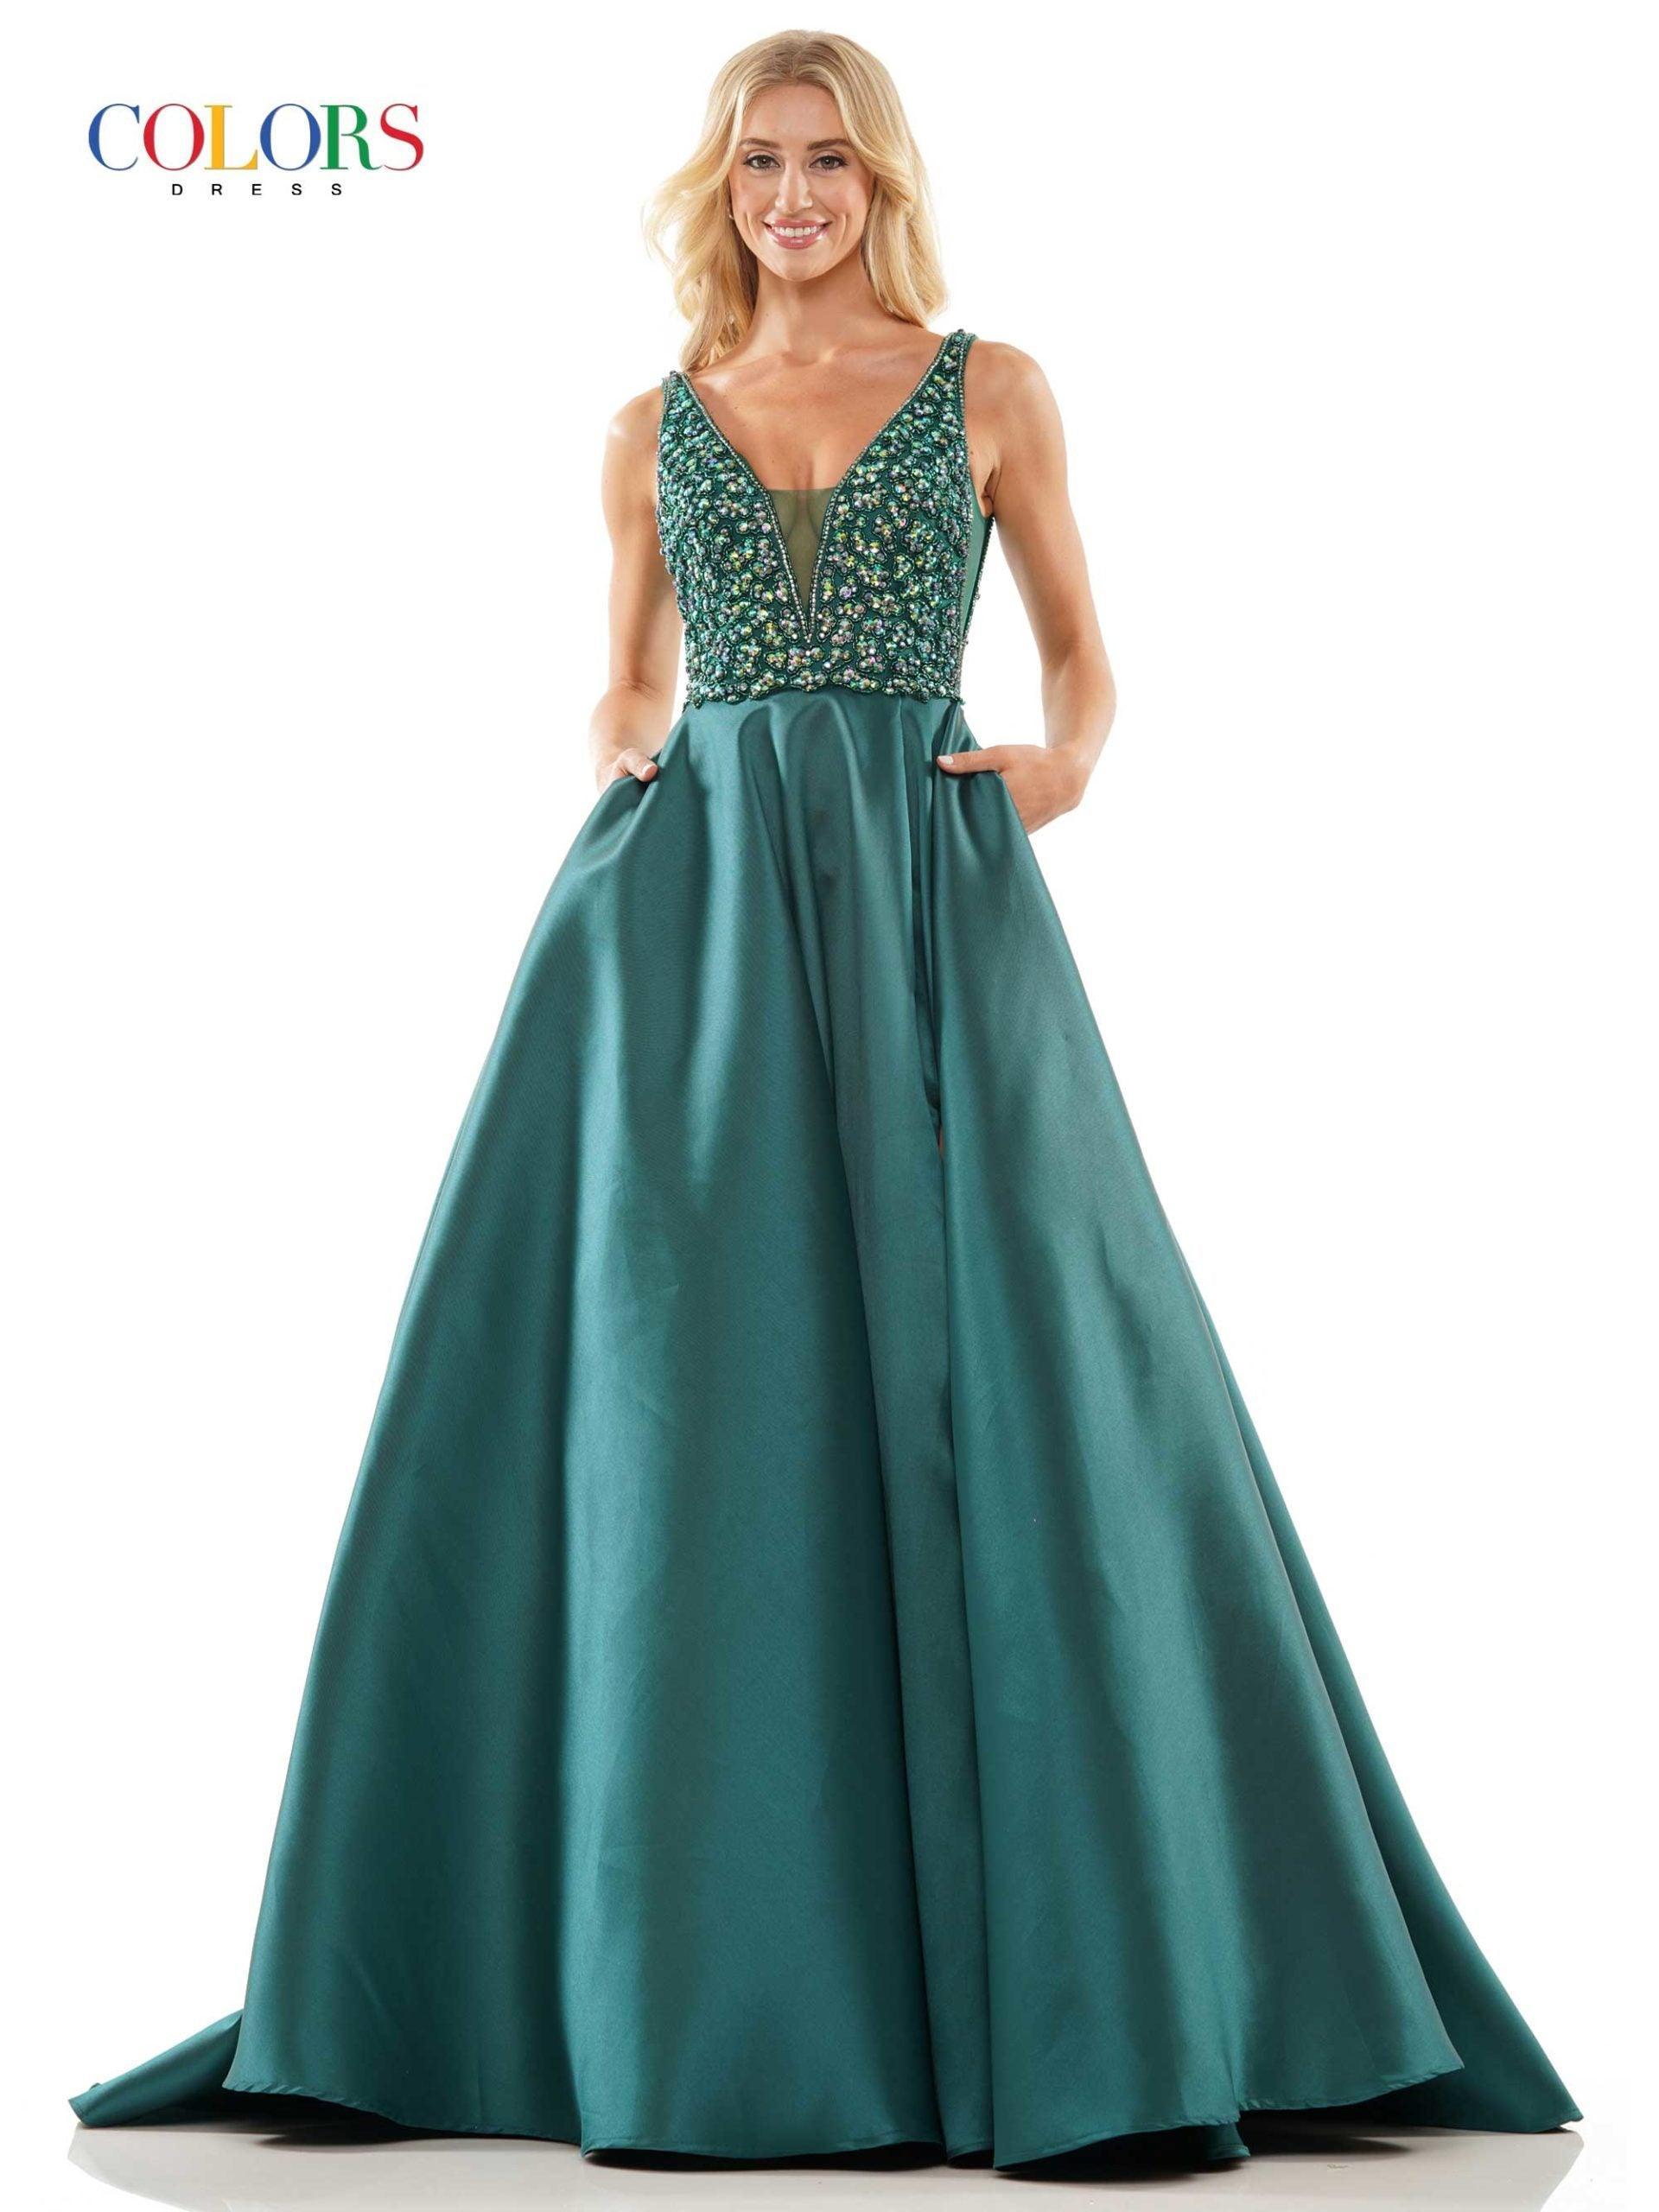 Colors Prom Long Sleeveless Dress - The Dress Outlet